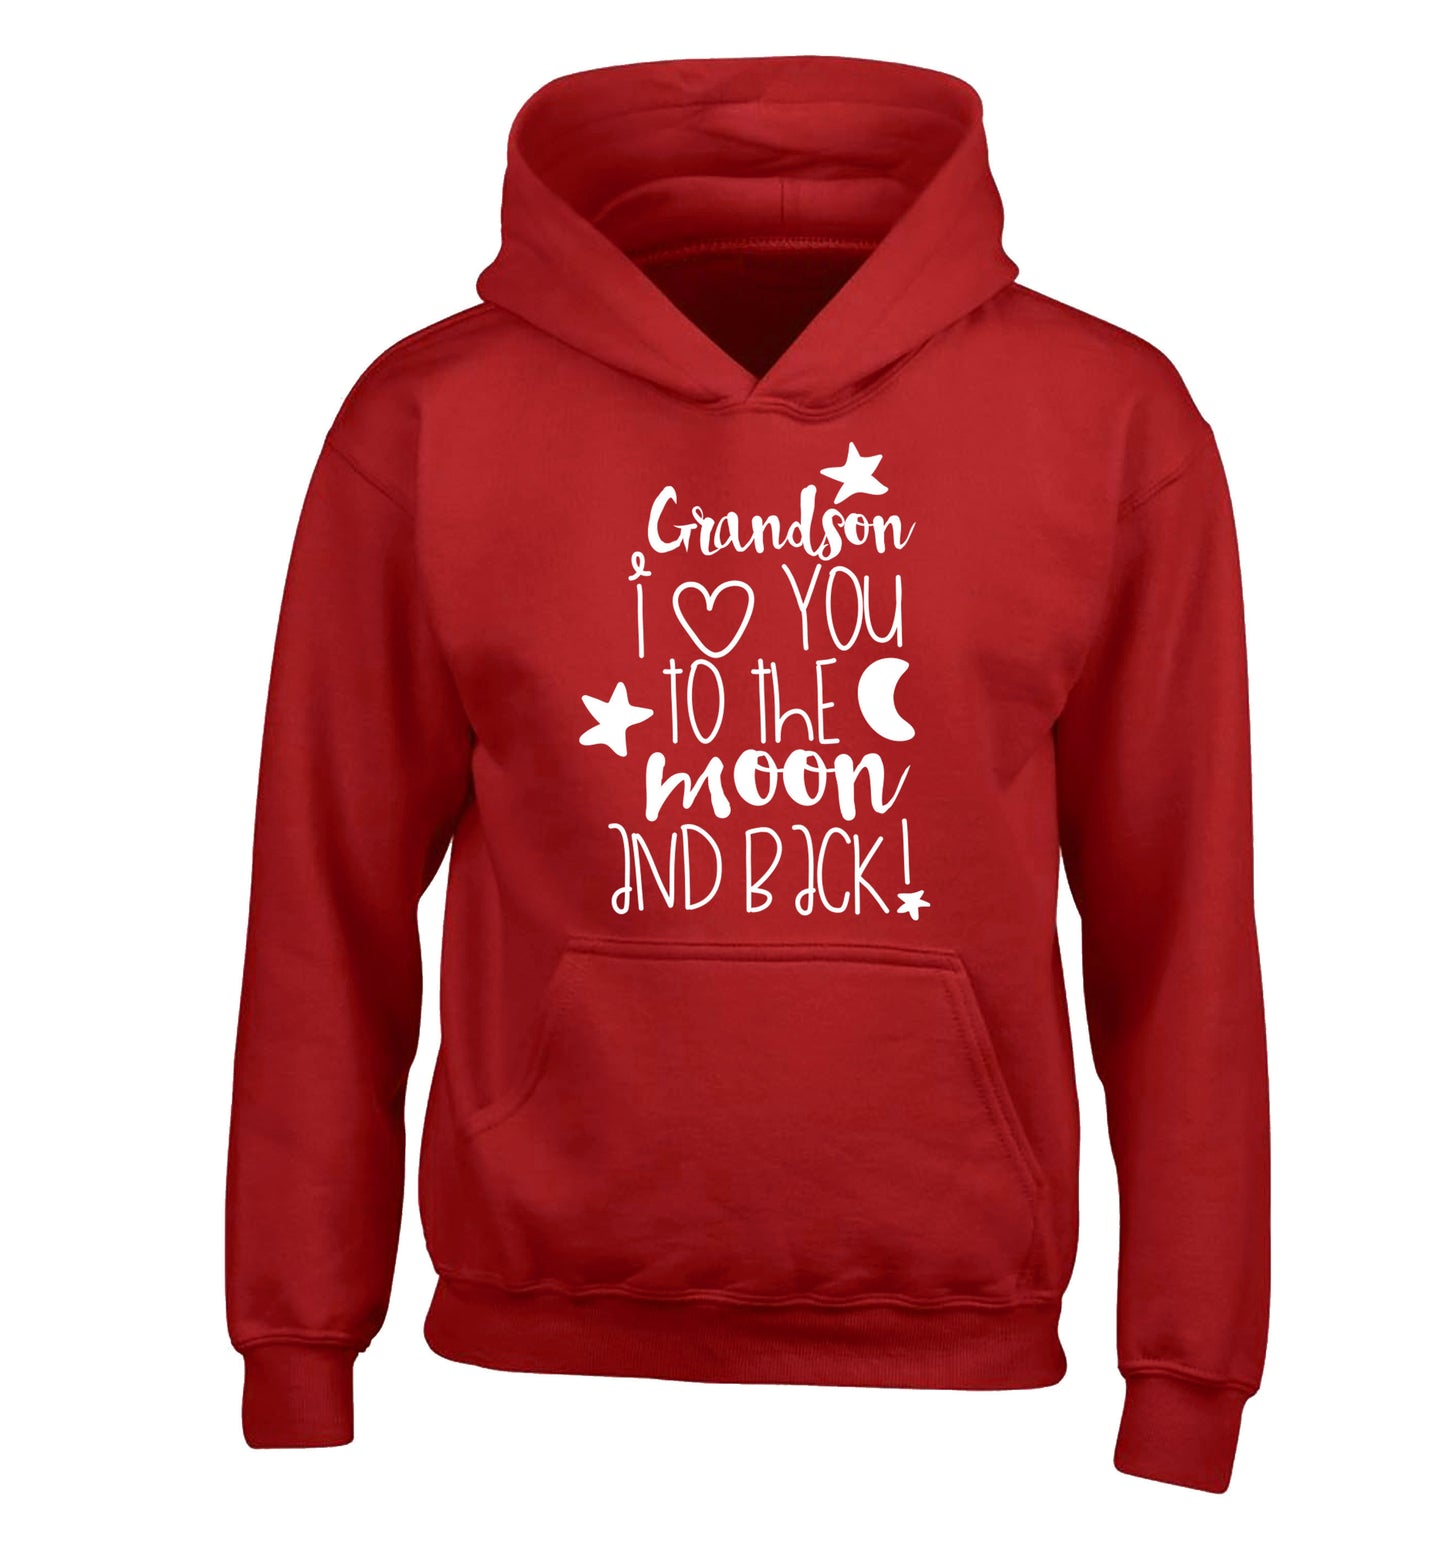 Grandson I love you to the moon and back children's red hoodie 12-14 Years